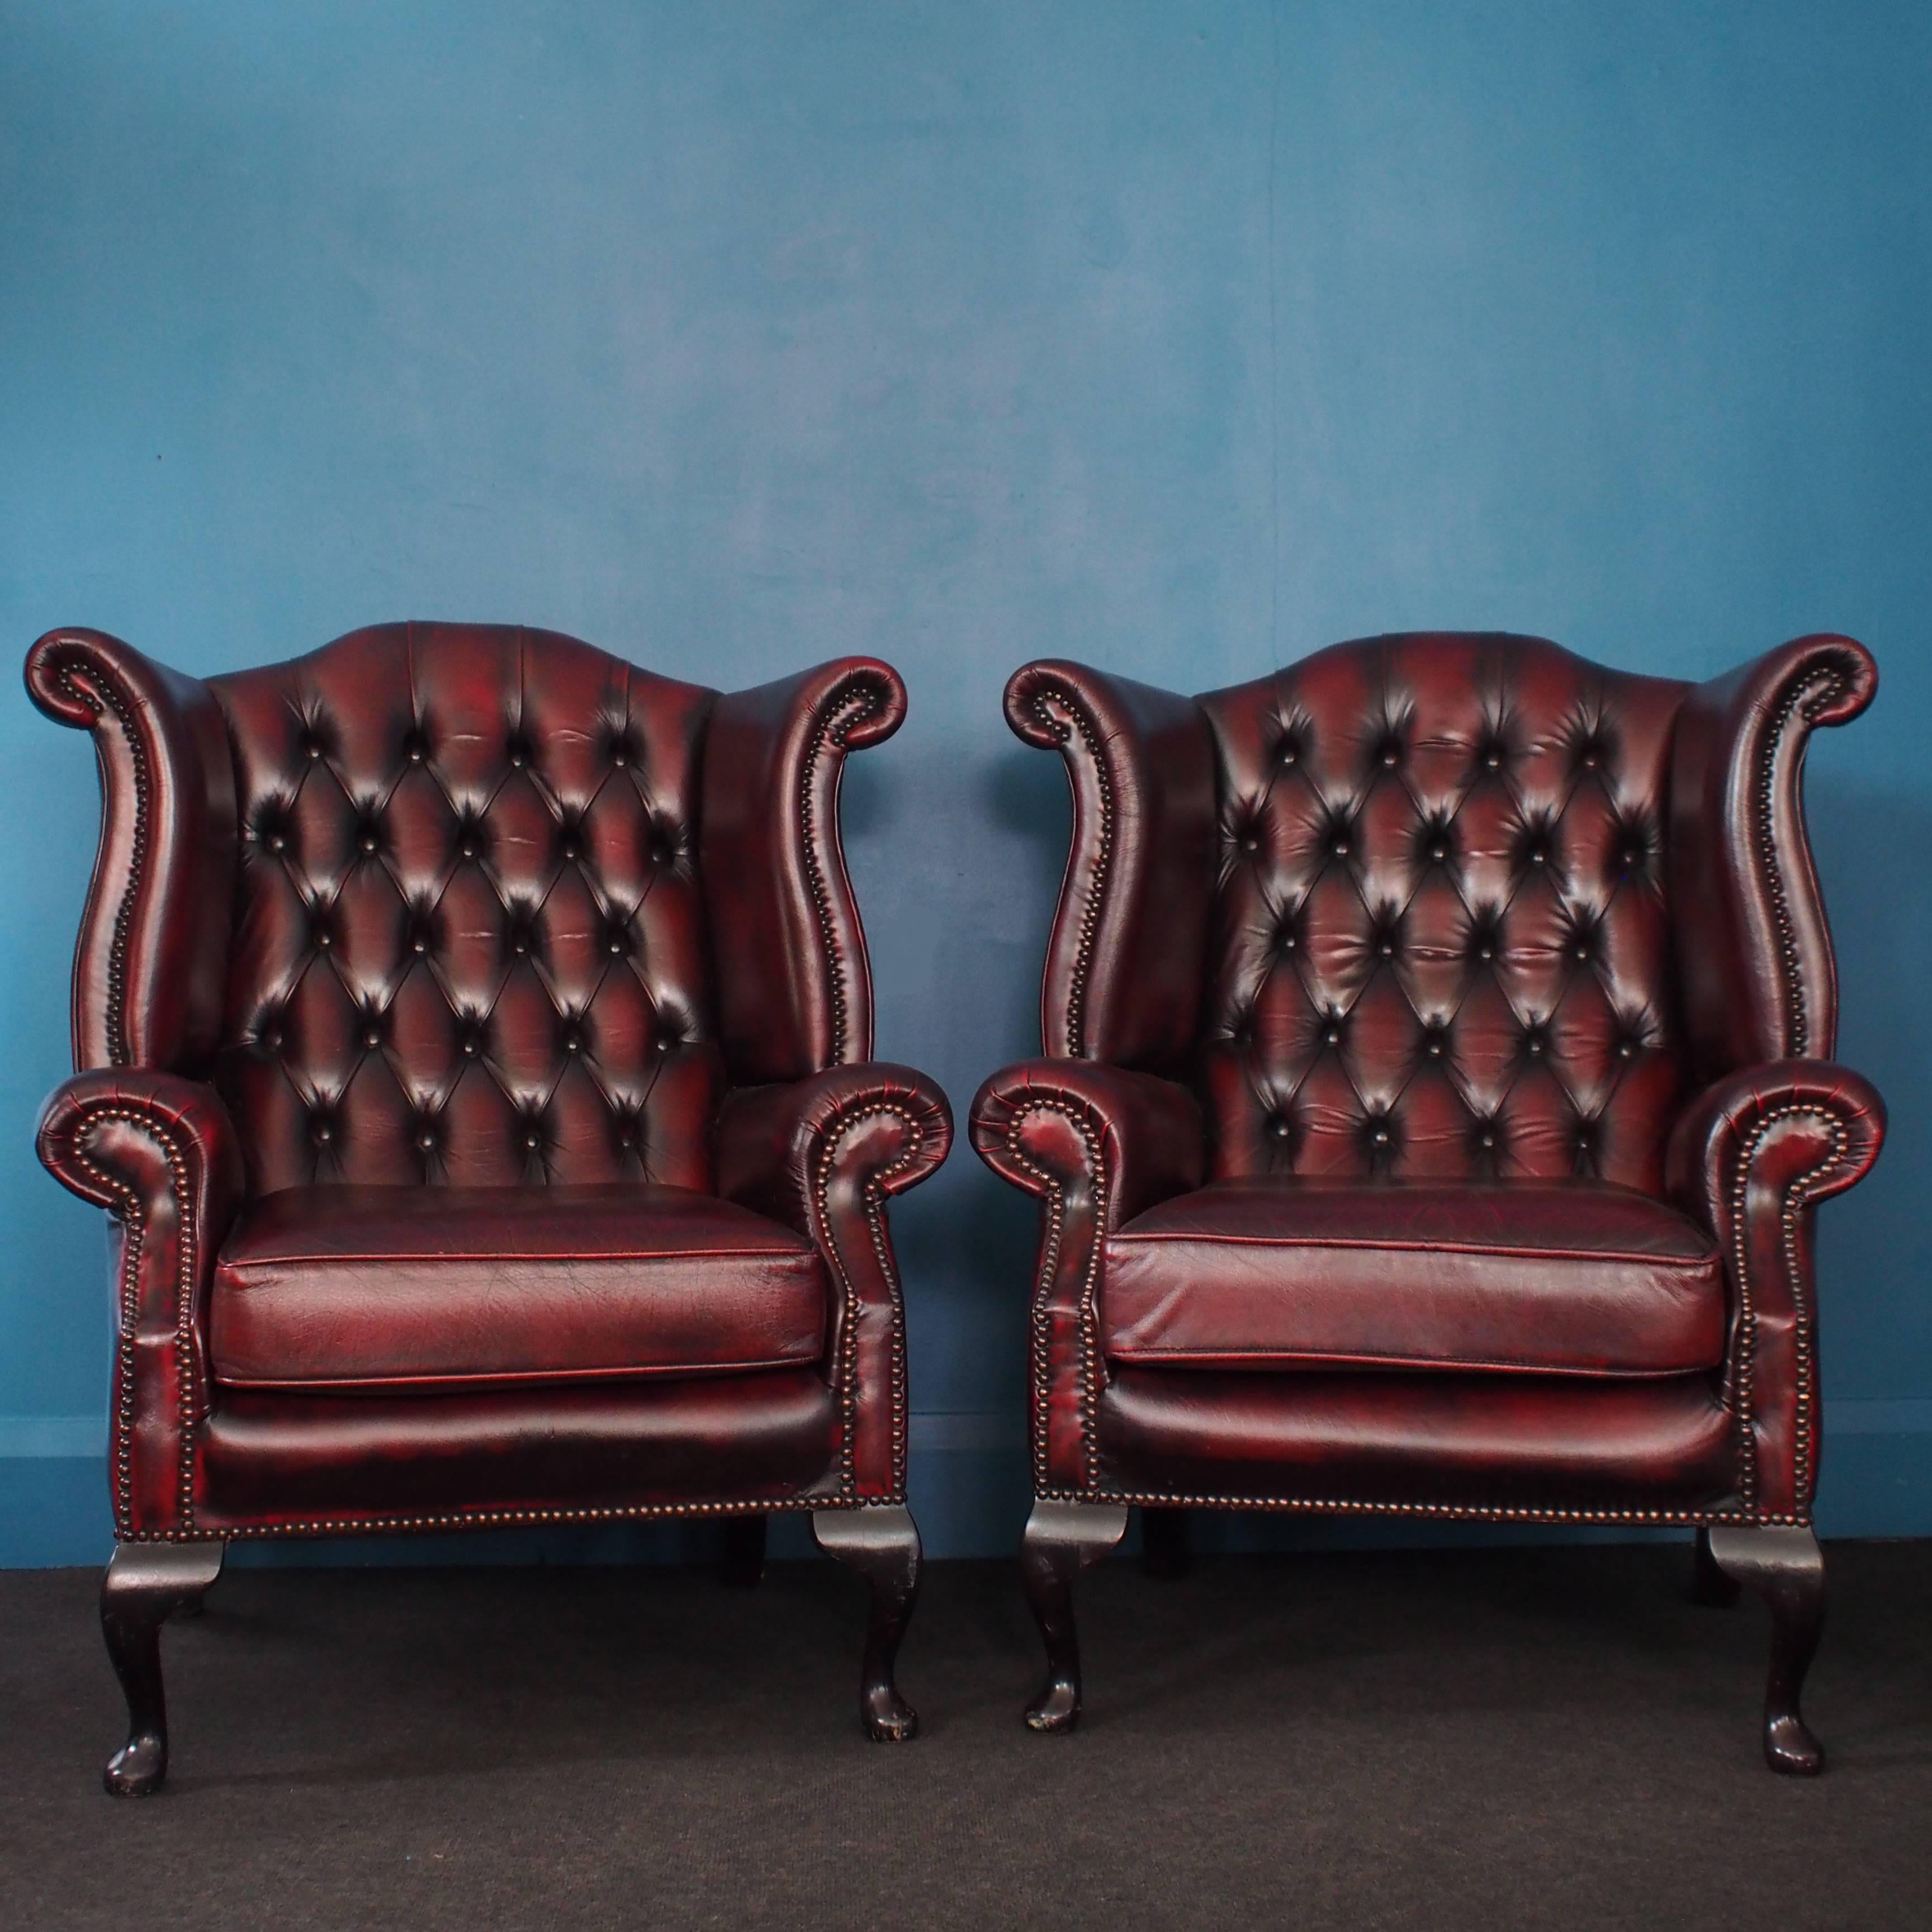 Upholstered in oxblood leather, this pair of matching wingback Chesterfield armchairs have cabriole legs at the front and curved legs at the rear. The seat cushions are removable.

*Free UK shipping (*postcode dependent) is offered for these